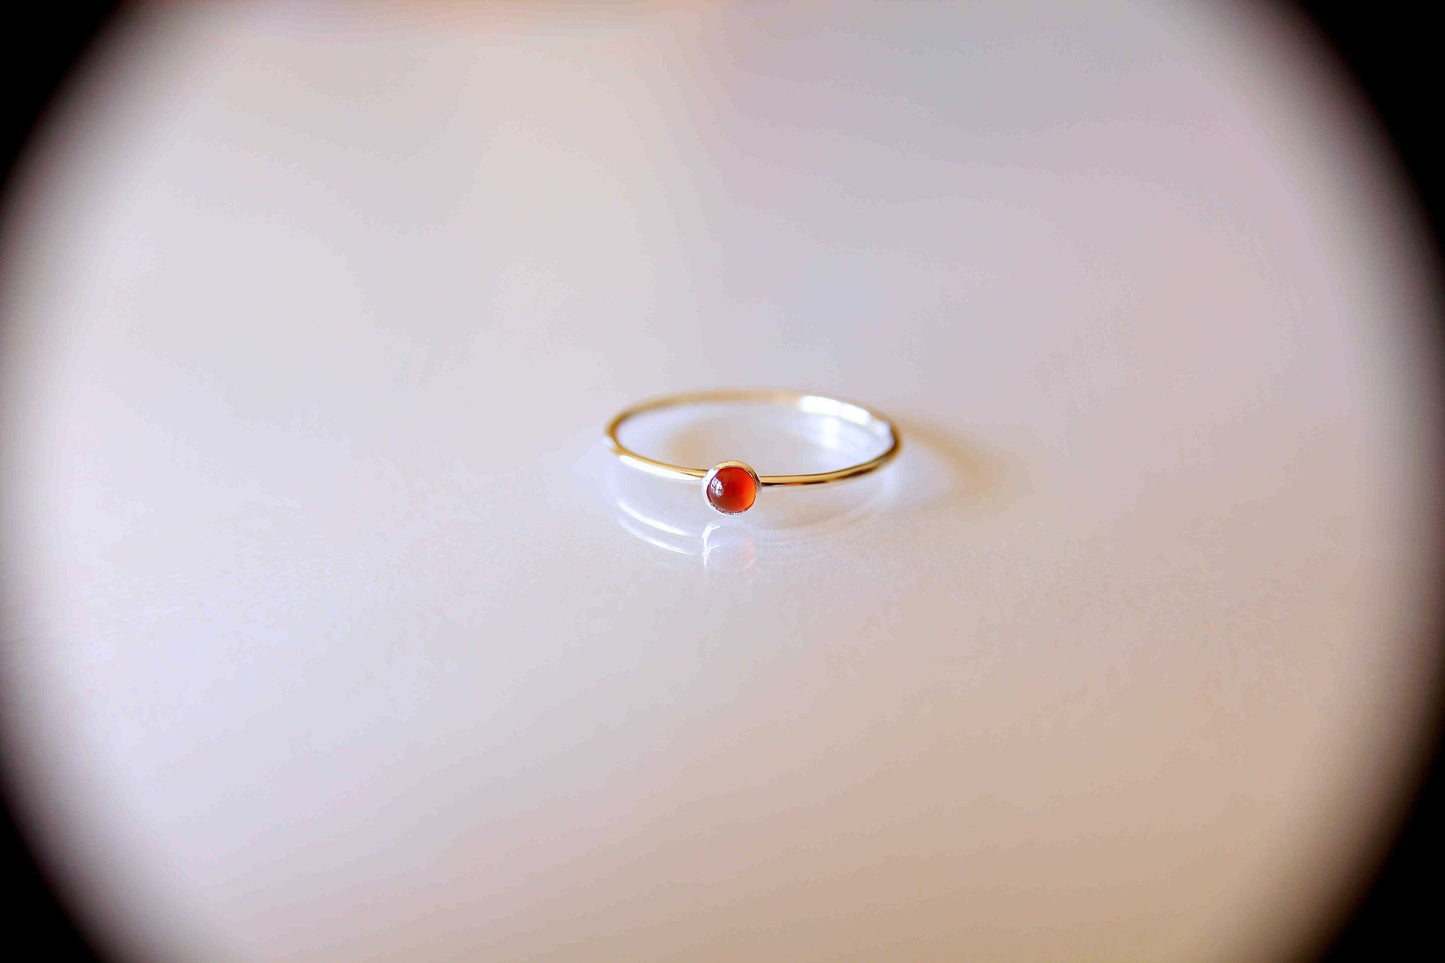 Carnelian Ring, Gemstone Ring, Tiny Carnelian Ring, Red, Modern, Simple, Everyday, Gift, Gemstone Jewelry, Natural Stone, Stacking Ring